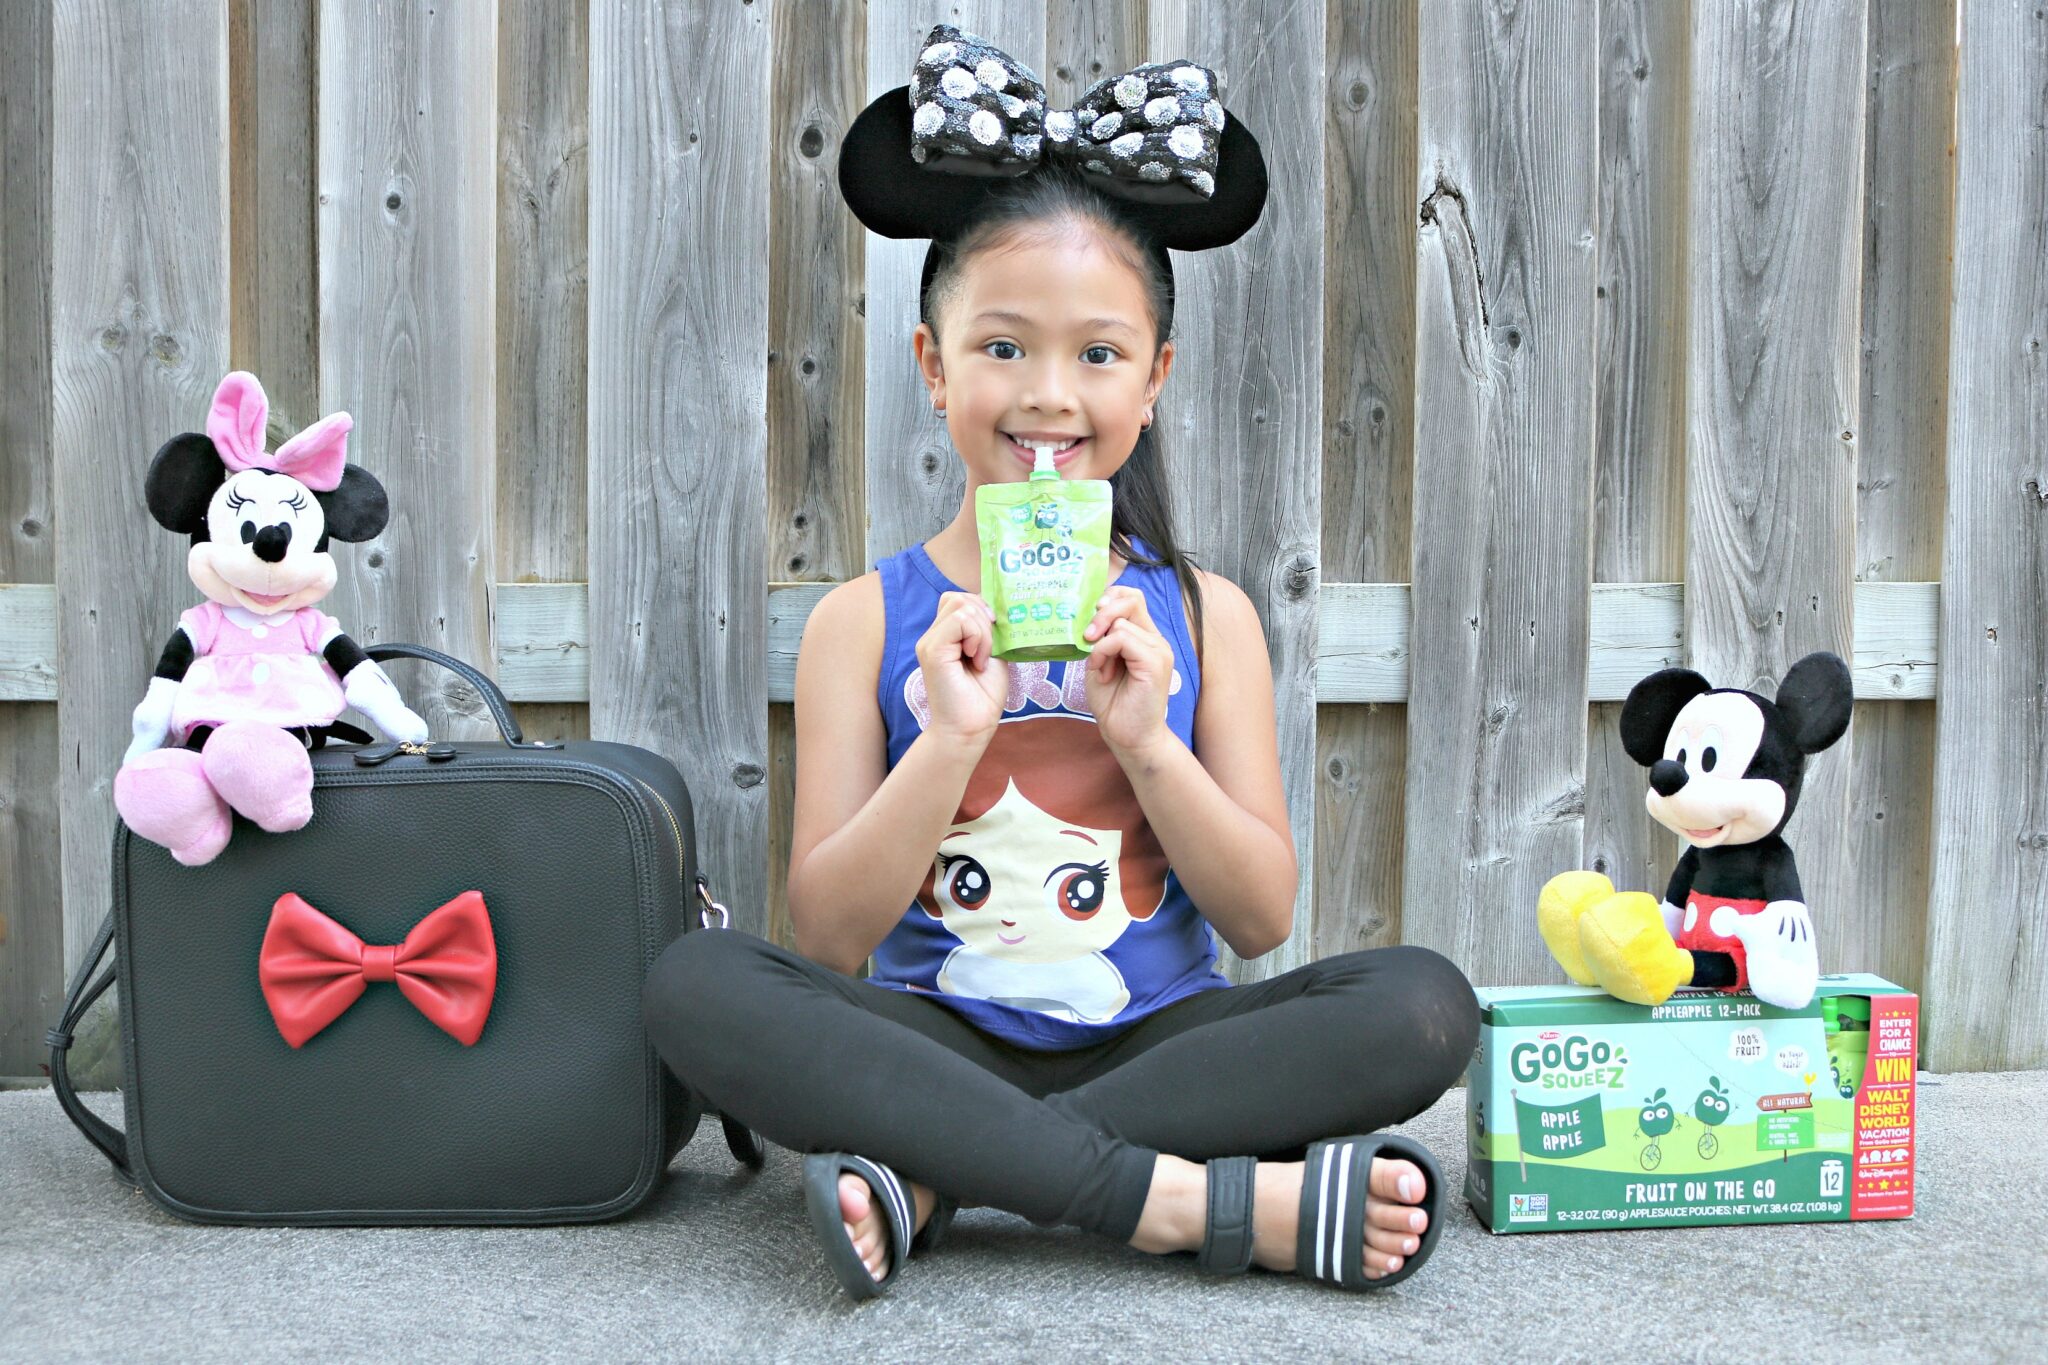 Win a Trip to Disney World w/ the SqueeZ the Moment Sweepstakes